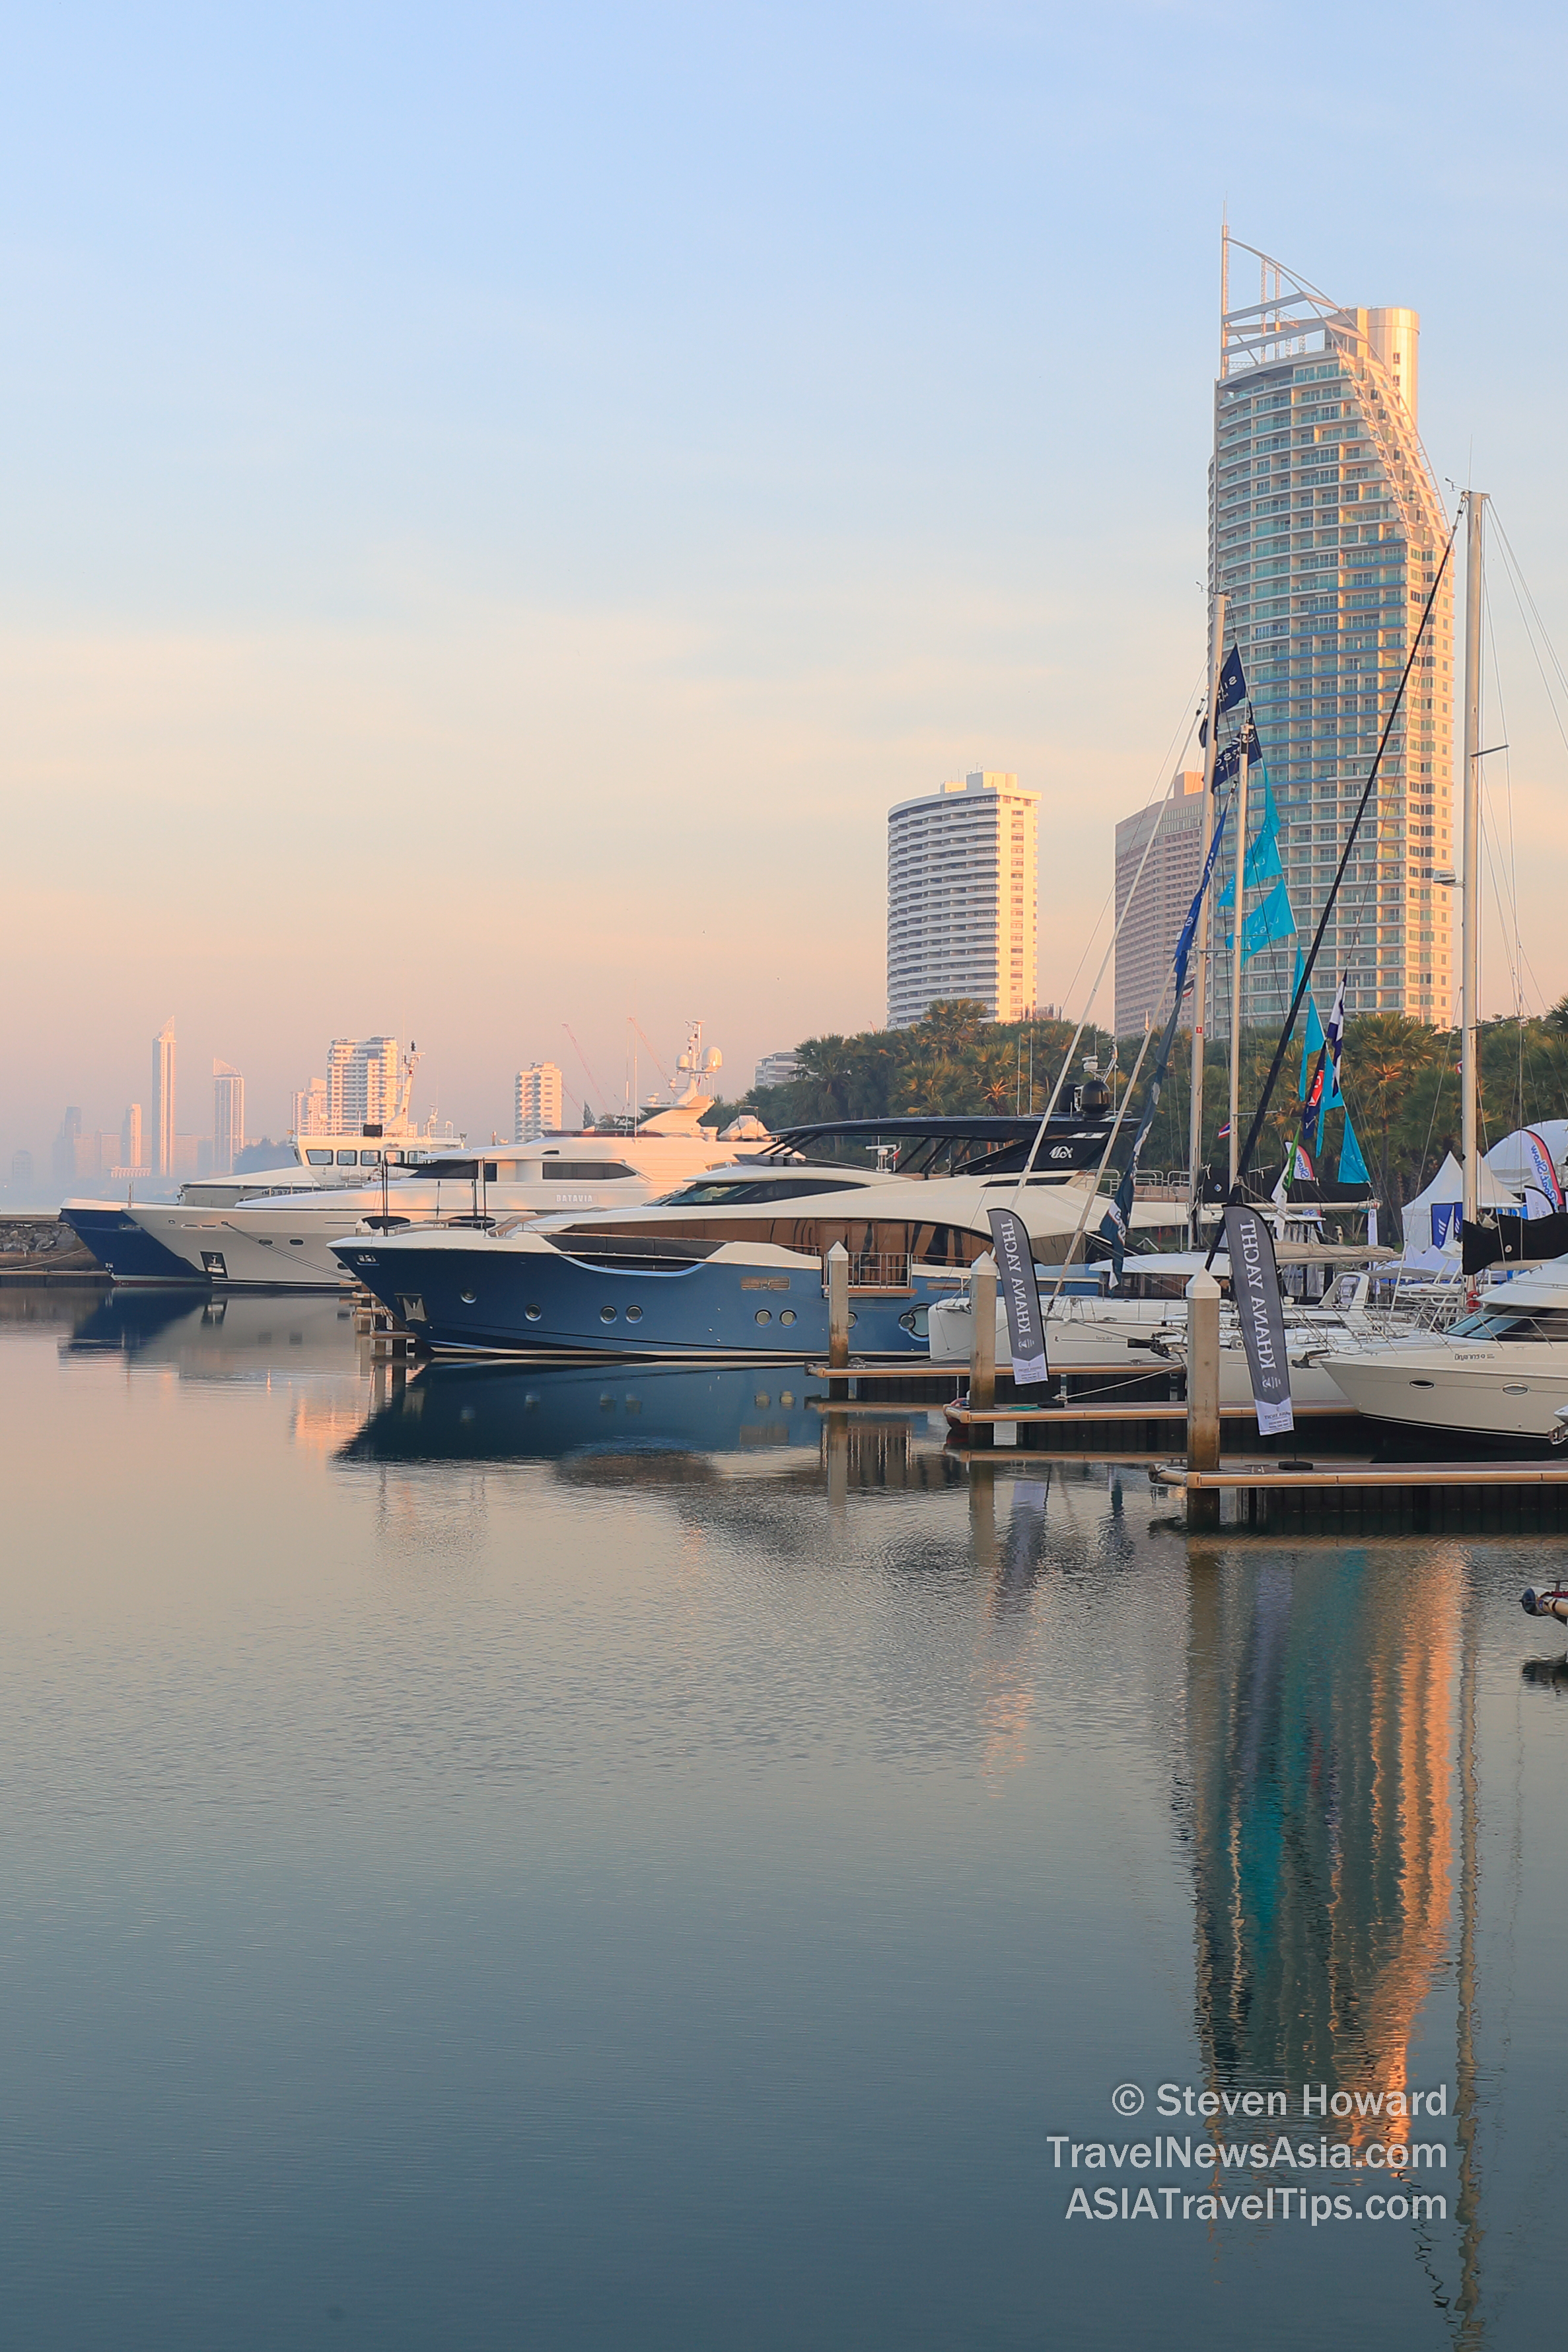 The 15th Top of the Gulf Regatta will take place at Ocean Marina Yacht Club from 30th April to 5th May 2019. Picture by Steven Howard of TravelNewsAsia.com Click to enlarge.